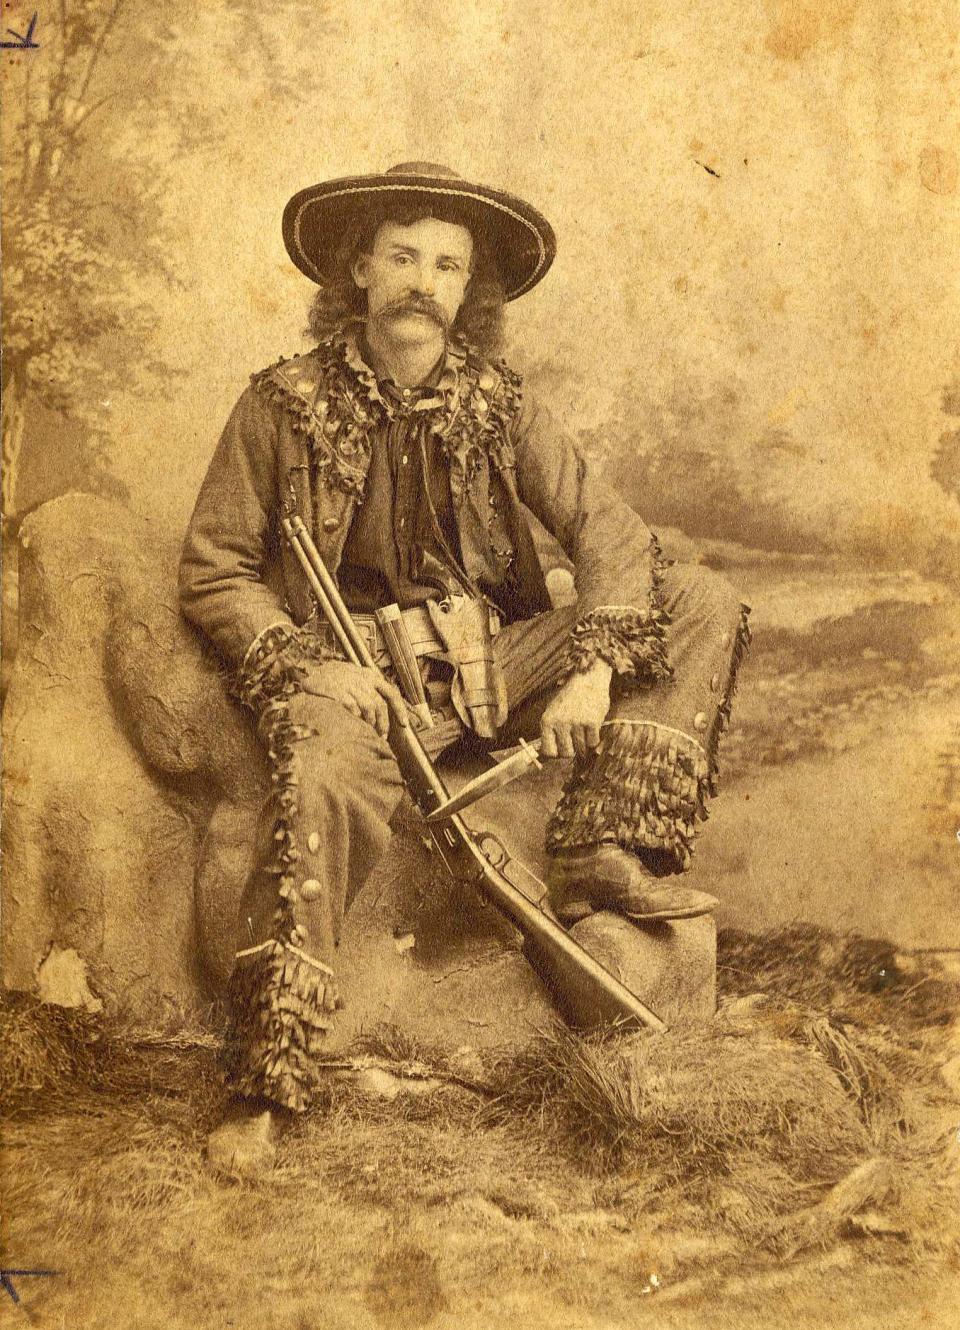 Circa 1880 photograph of Andrew Jackson Sowell, a Texas Ranger, holding a rifle by the barrel in his right hand, and a knife in his left. Portrait was taken in a studio with a painted background depicting a landscape. 